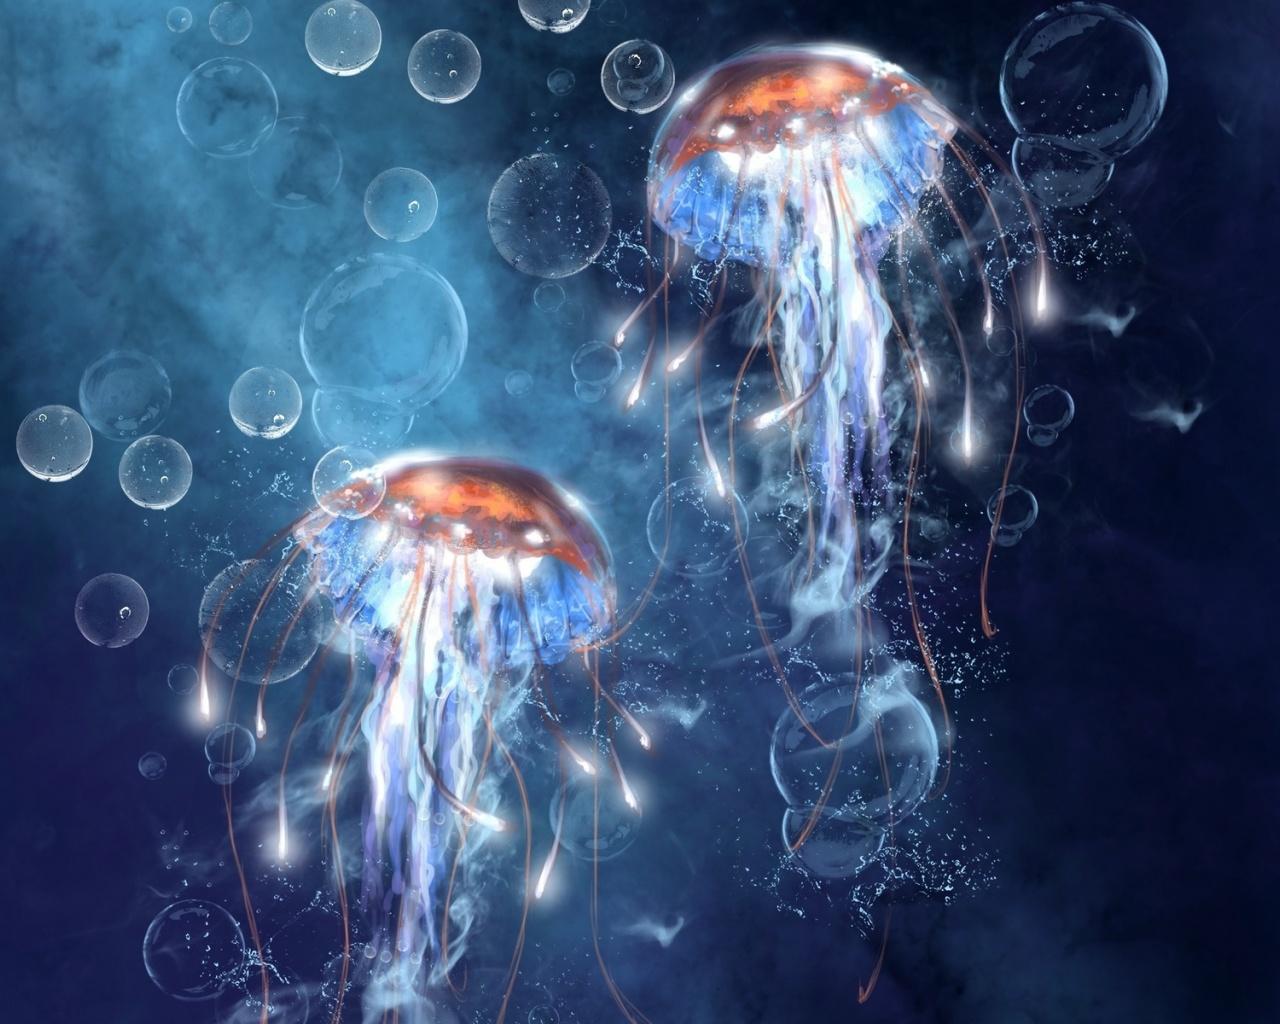 Jelly Fish Underwater Bubbles wallpaper. Jelly Fish Underwater